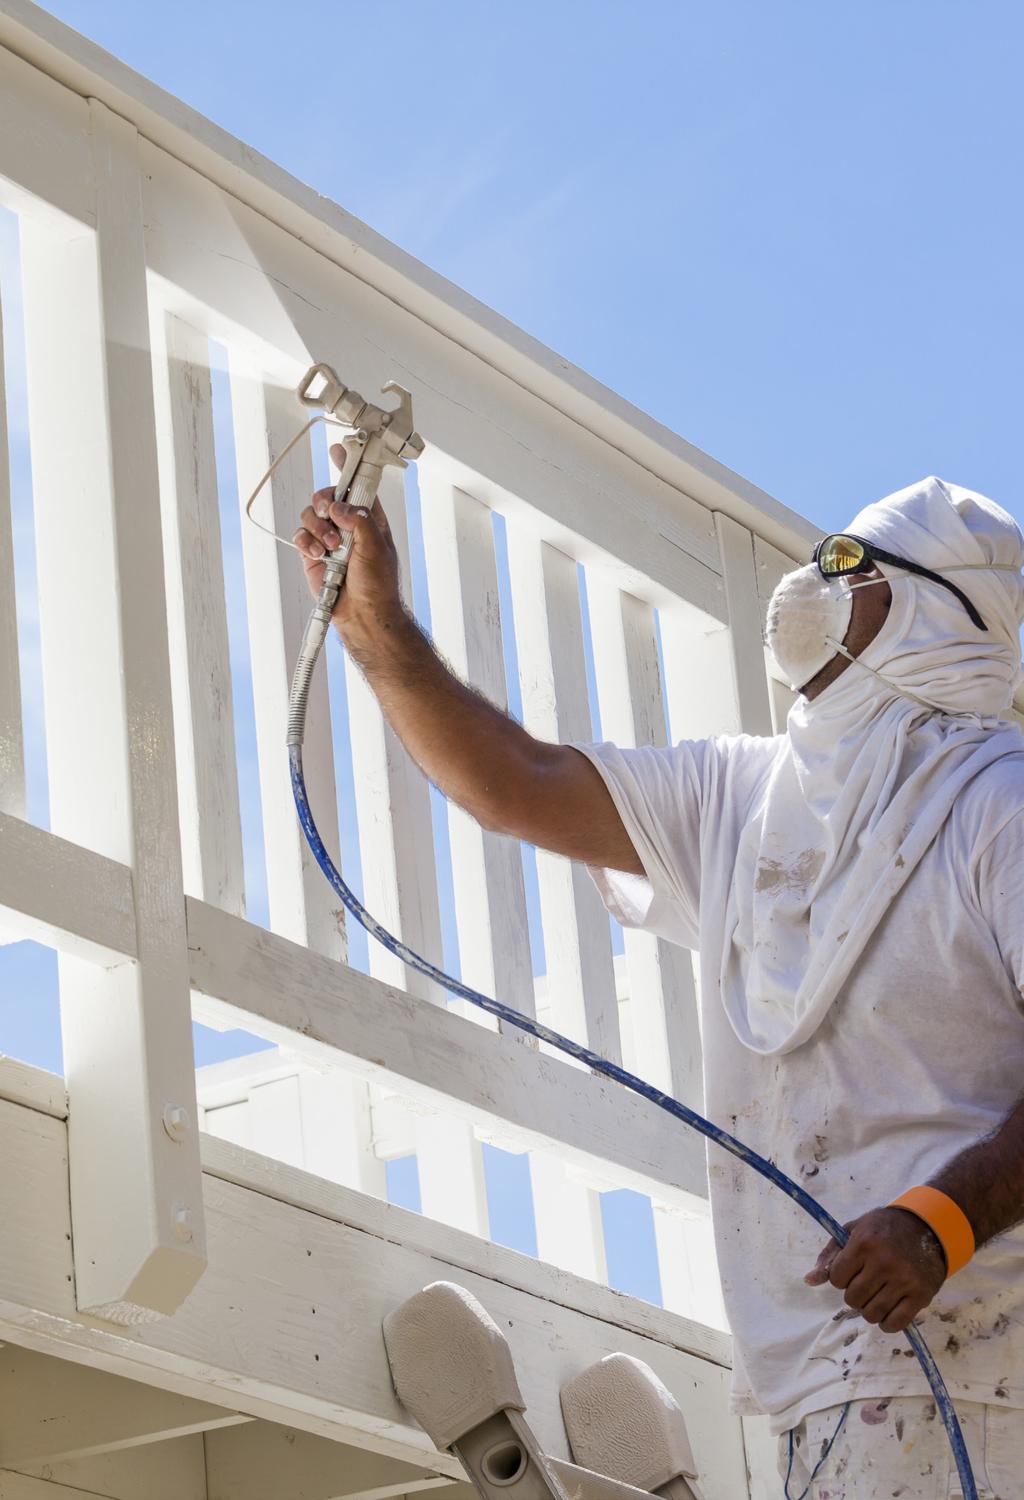 High-durability Paint Healthcare buildings like hospitals and doctor s offices are typically high-traffic areas, making high-durability paint necessary to keep up.